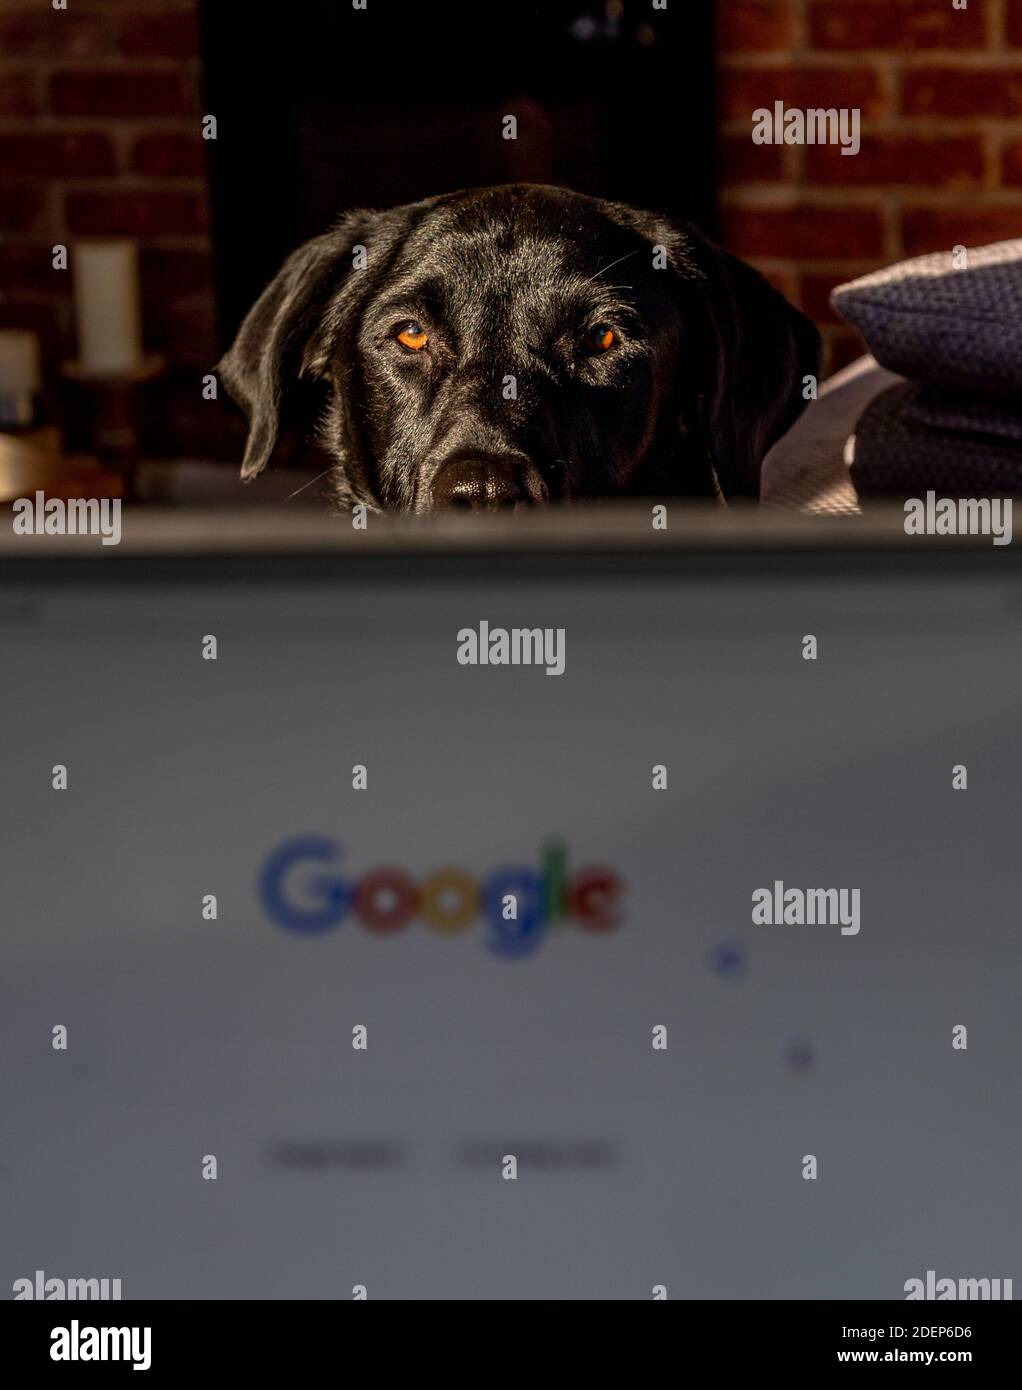 A black labrador retriever looks over the screen of a laptop wanting his owner's attention. Stock Photo